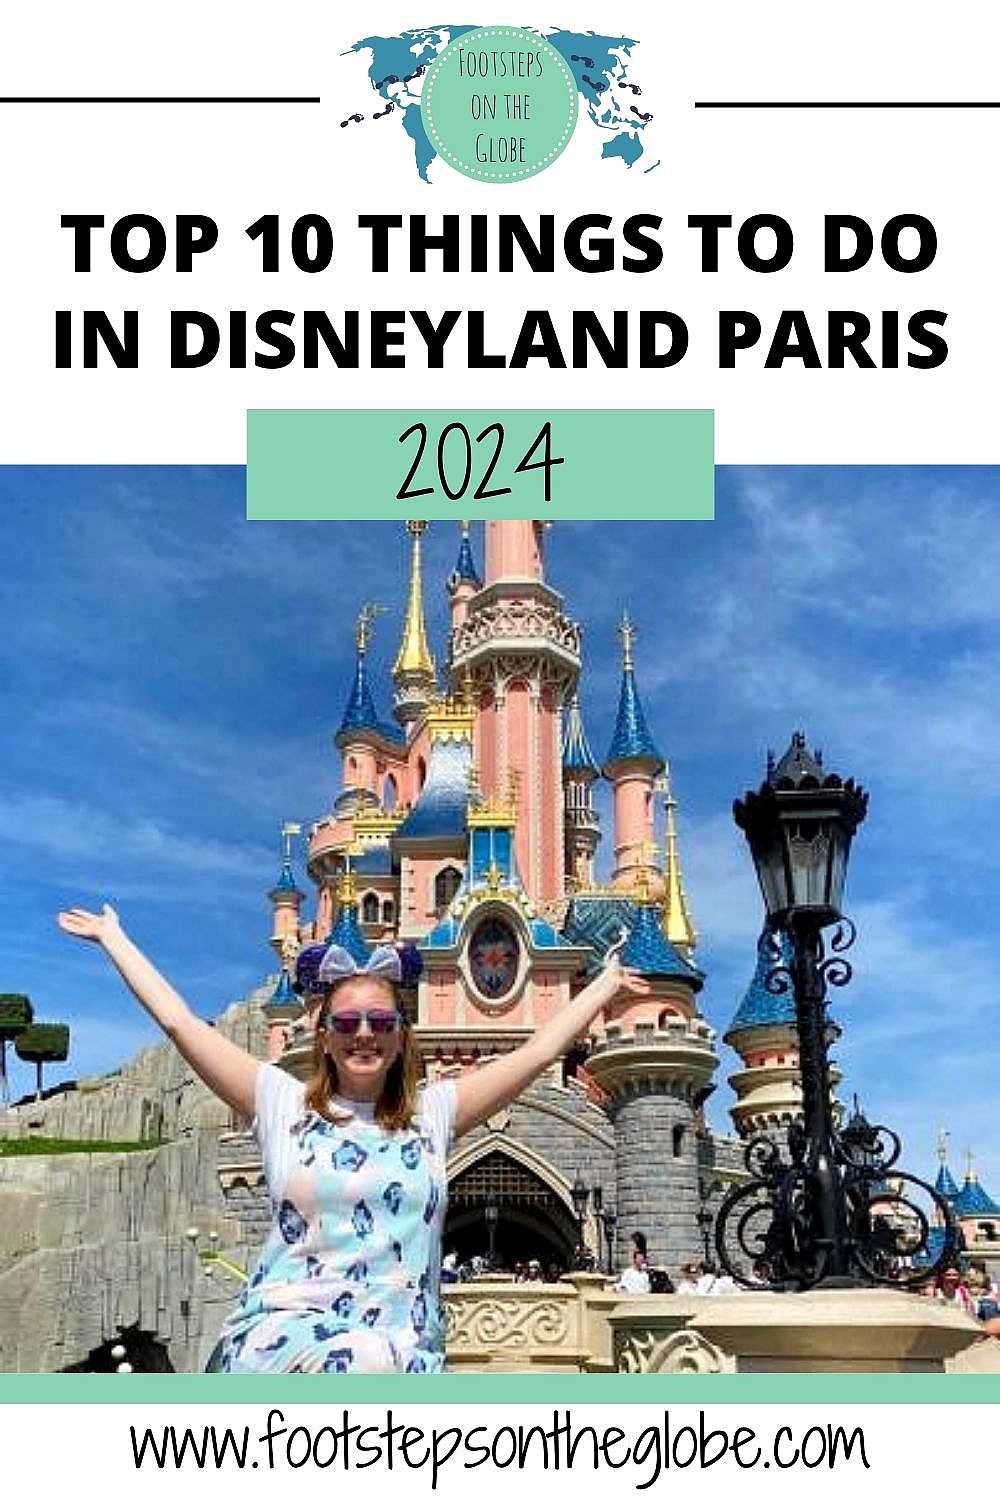 Pinterest image of Mel holding up her arms wearing mouse ears in front of Sleeping Beauty's castle with the text: "Top 10 things to do in Disneyland Paris 2024!"